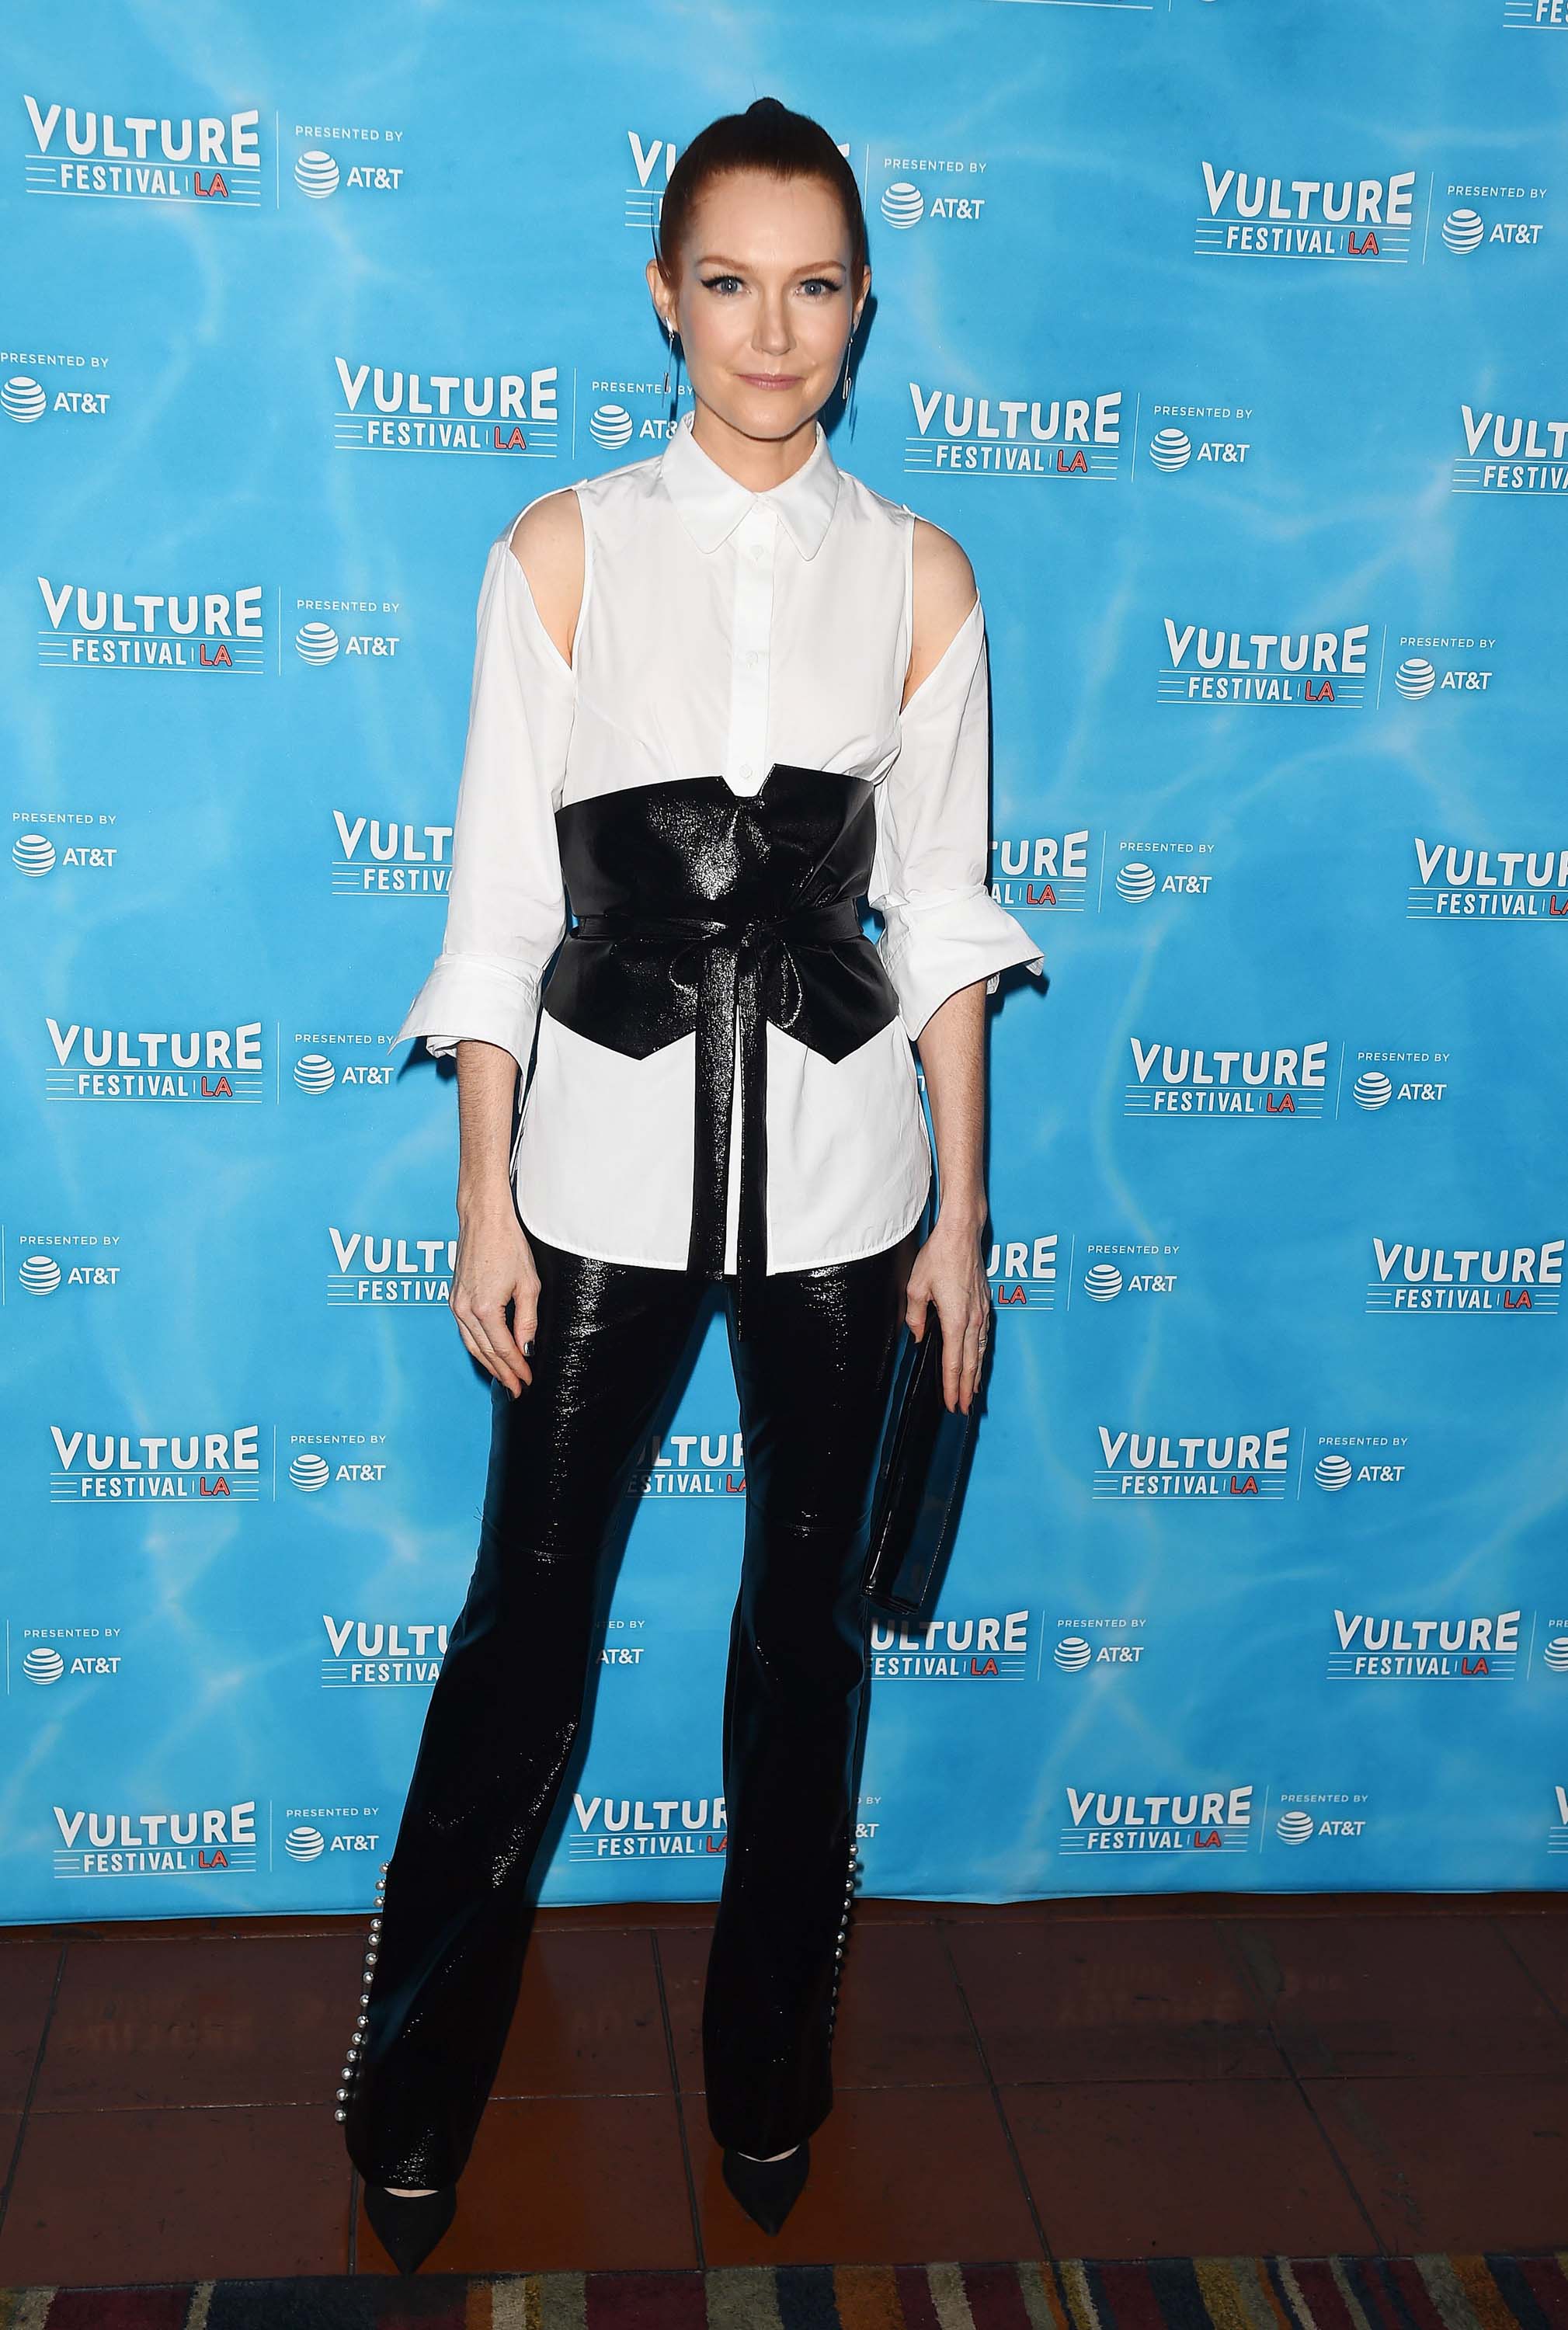 Darby Stanchfield attends Scandal Panel Vulture Festival